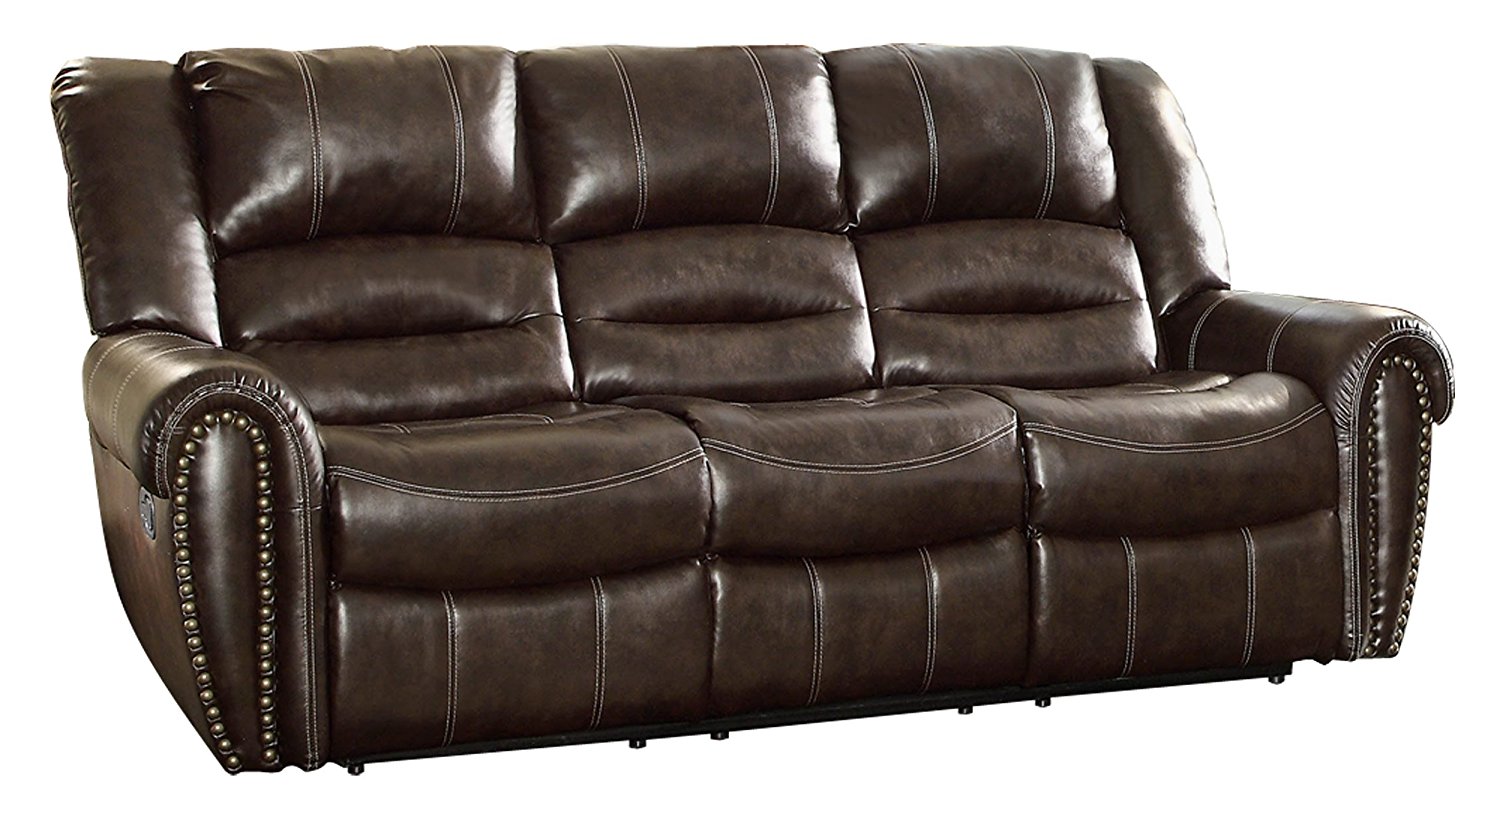 Homelegance 9668BRW-3 Double Reclining Sofa, Brown Bonded Leather